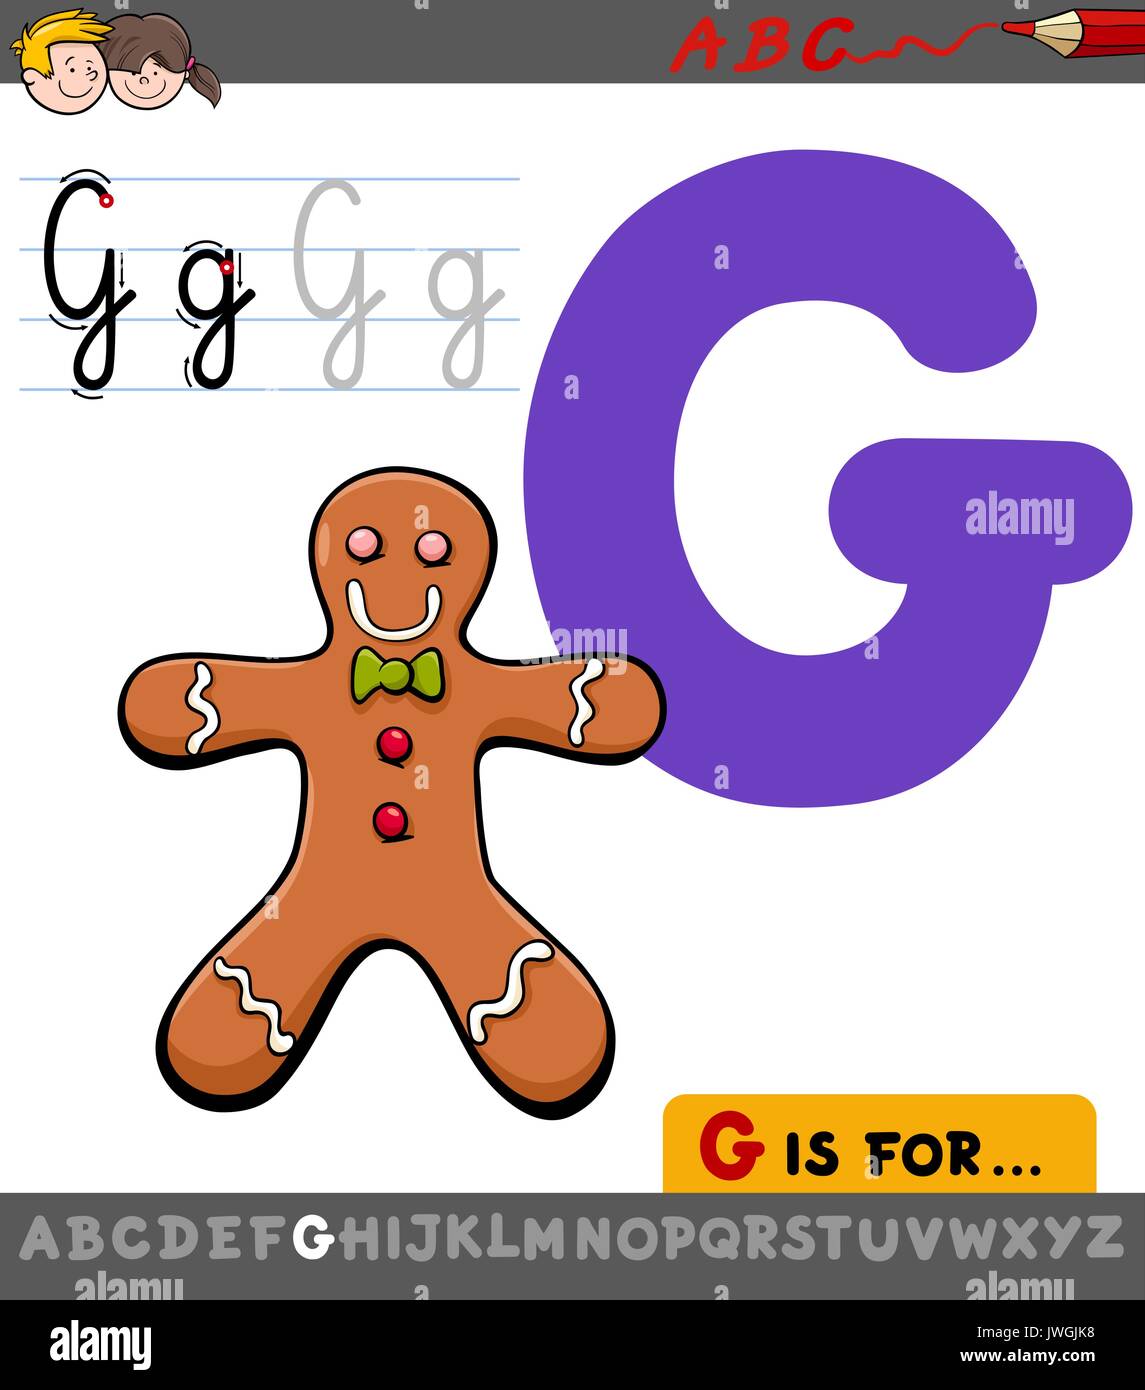 Educational Cartoon Illustration of Letter G from Alphabet with Gingerbread Man Sweet Food for Children Stock Vector